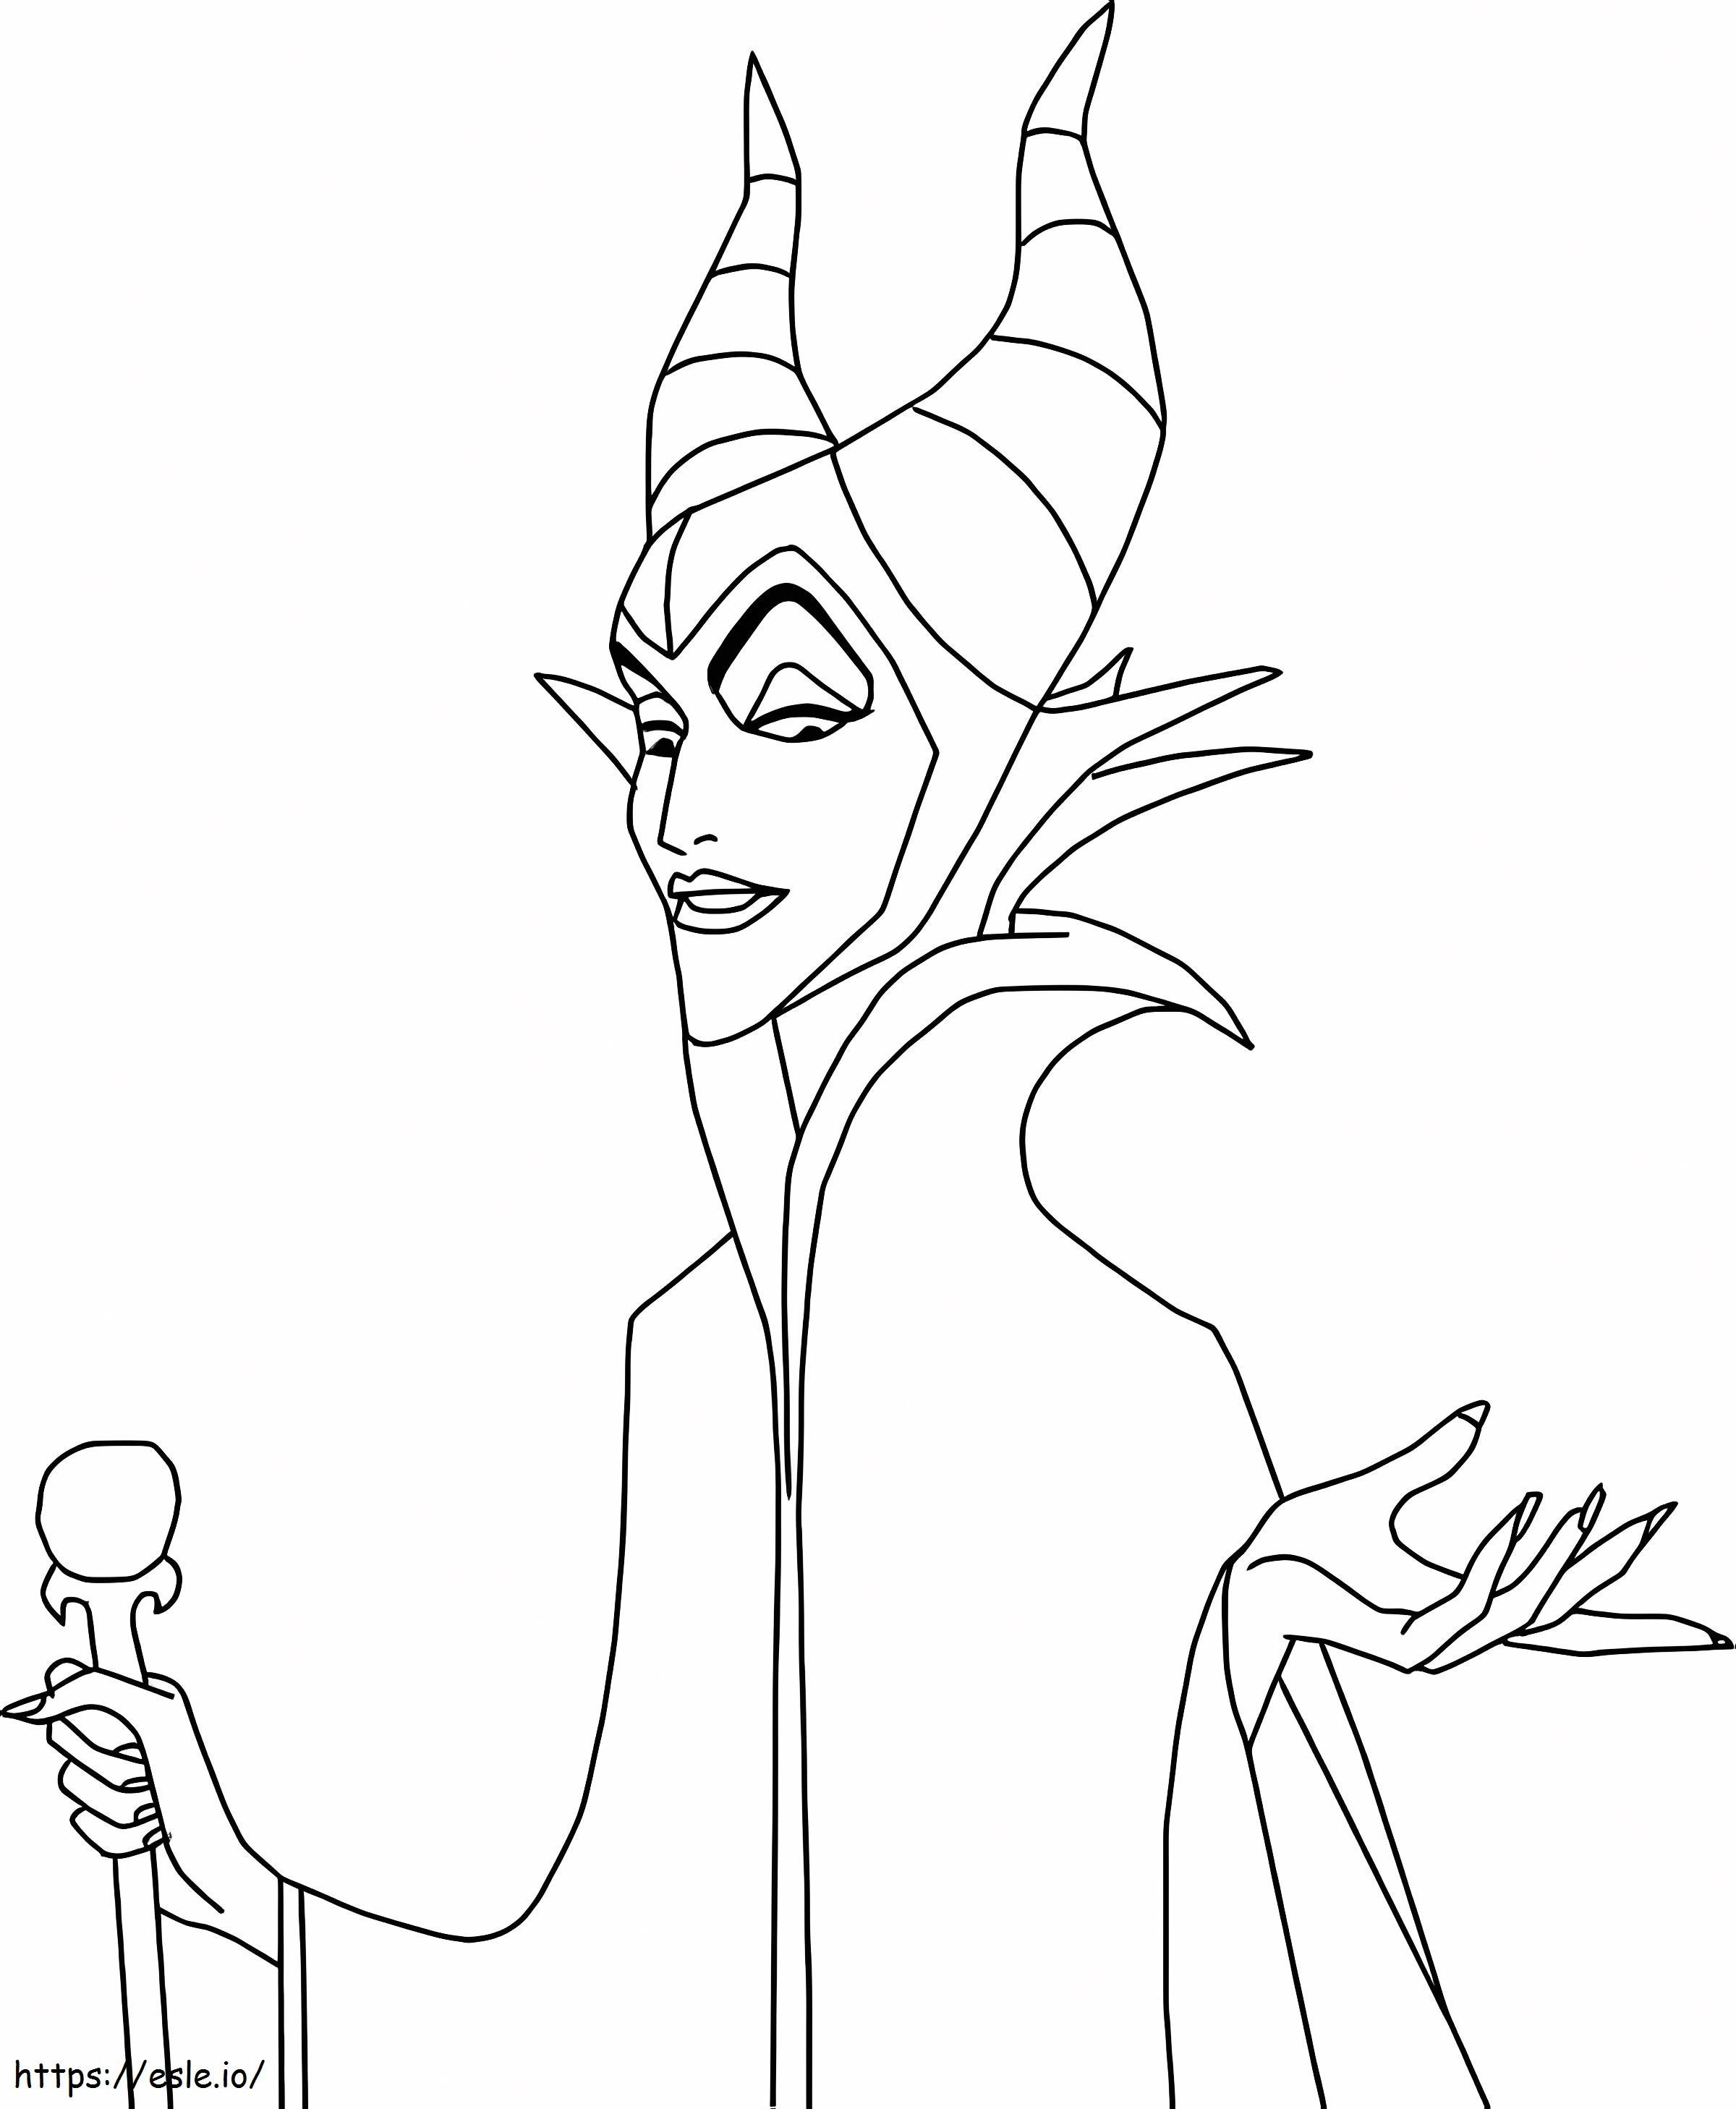 Maleficent In Cartoon coloring page